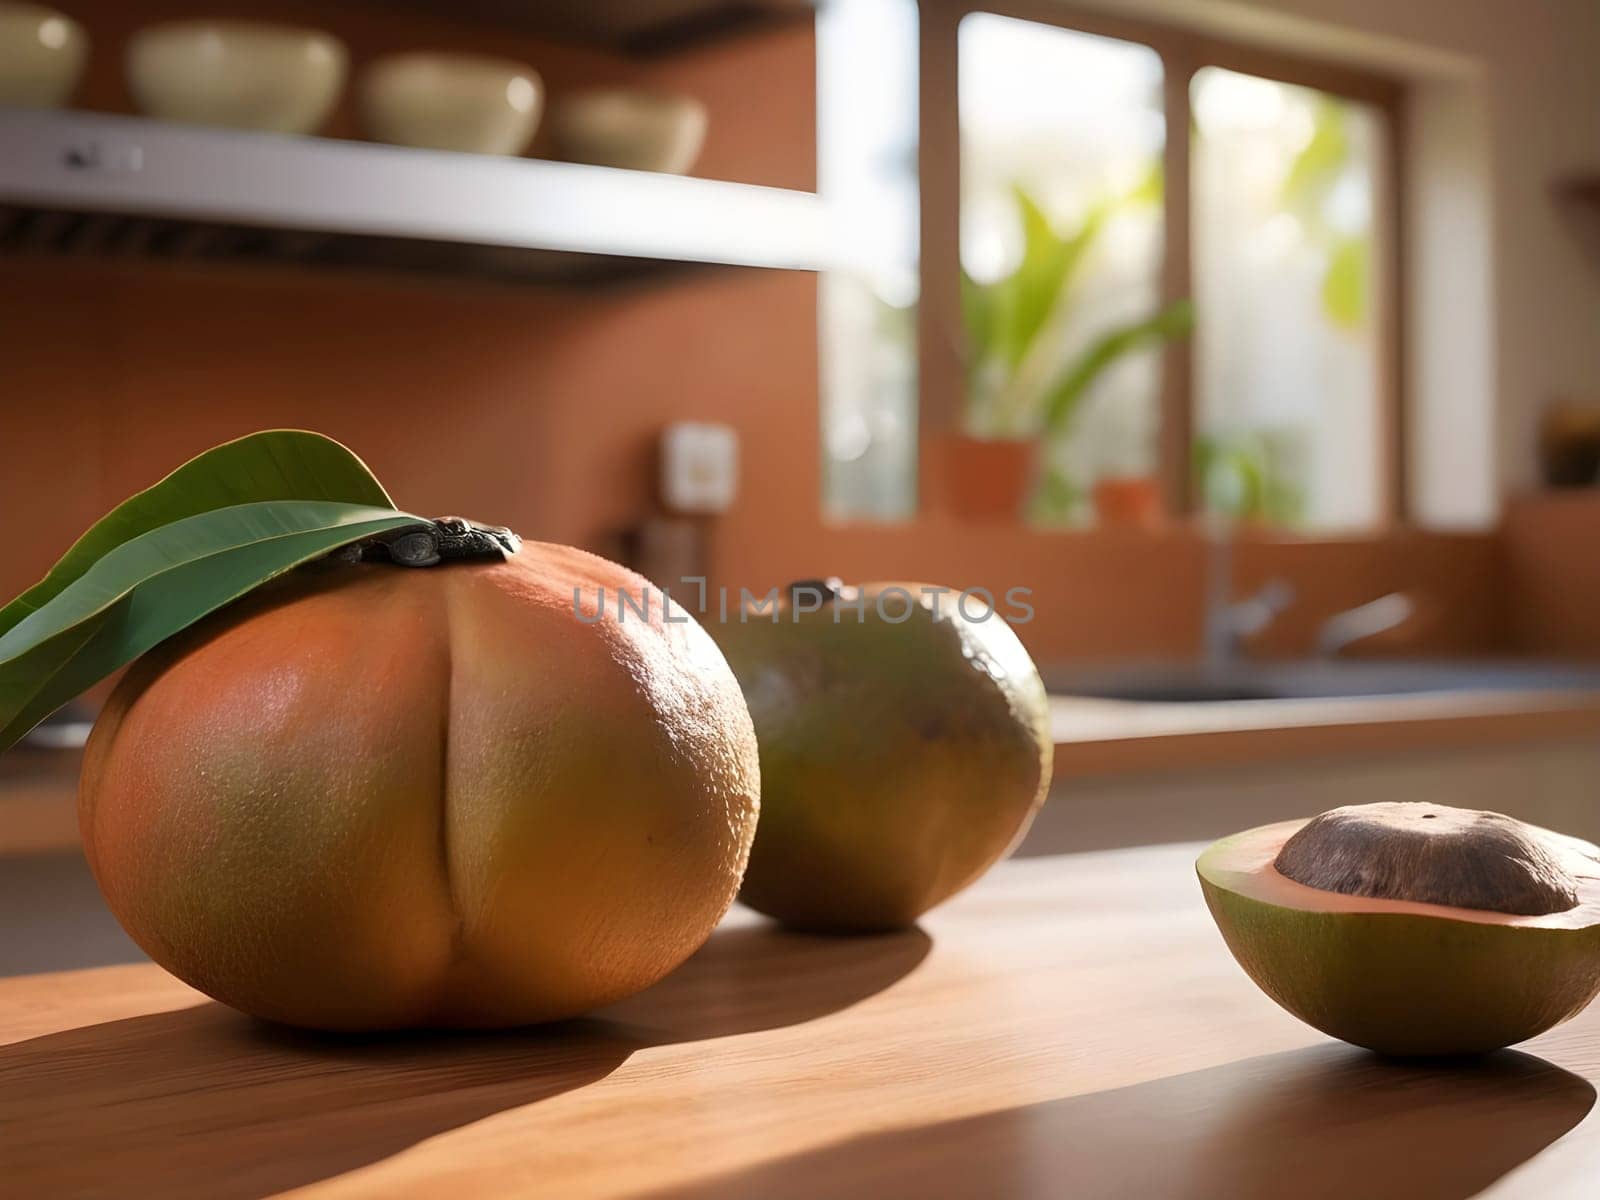 Sapote Serenity: A Kitchen Bathed in Afternoon Light Frames the Foreground Fruit.